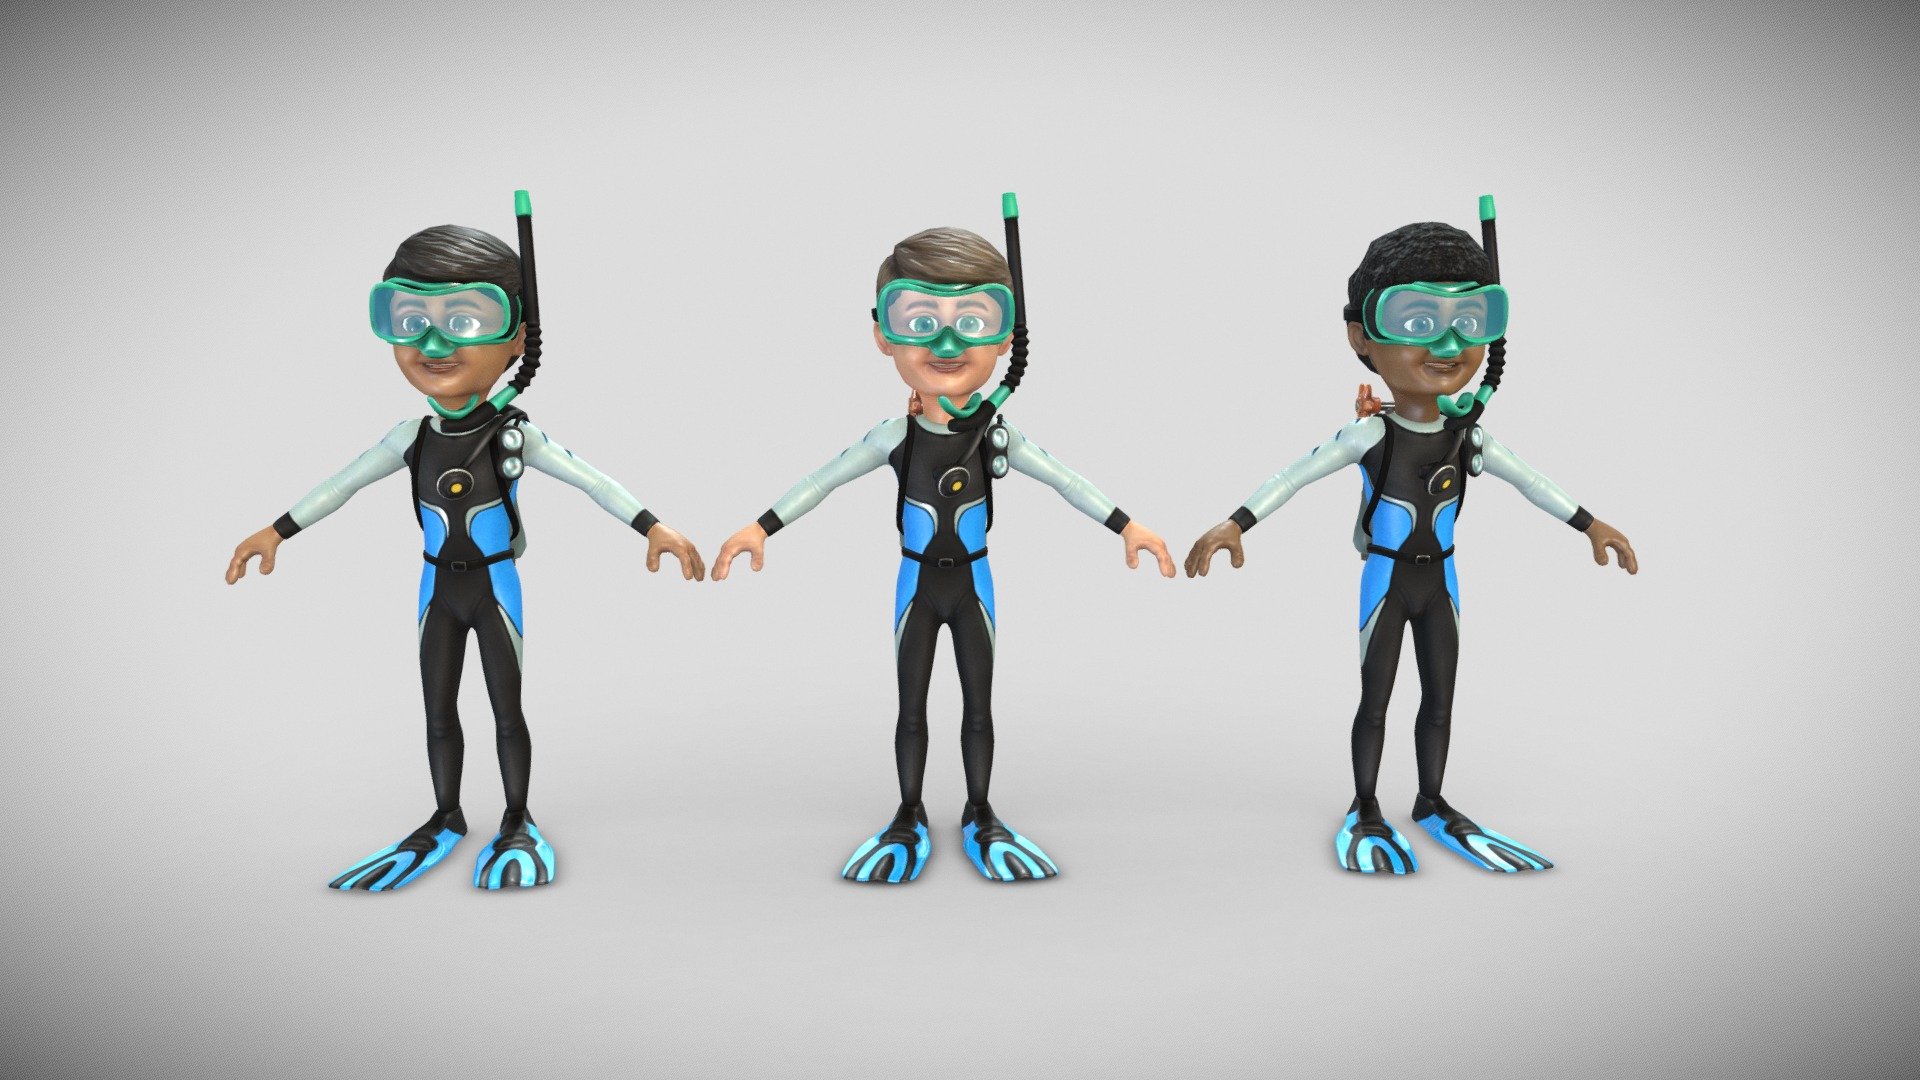 A child (Boy) model dressed for Scuba Diving. White, Latino, and Black versions included.

Color, Specular/Gloss, Occlusion, and Normal maps are 4096.

Collada, FBX, and OBJ formats included 3d model